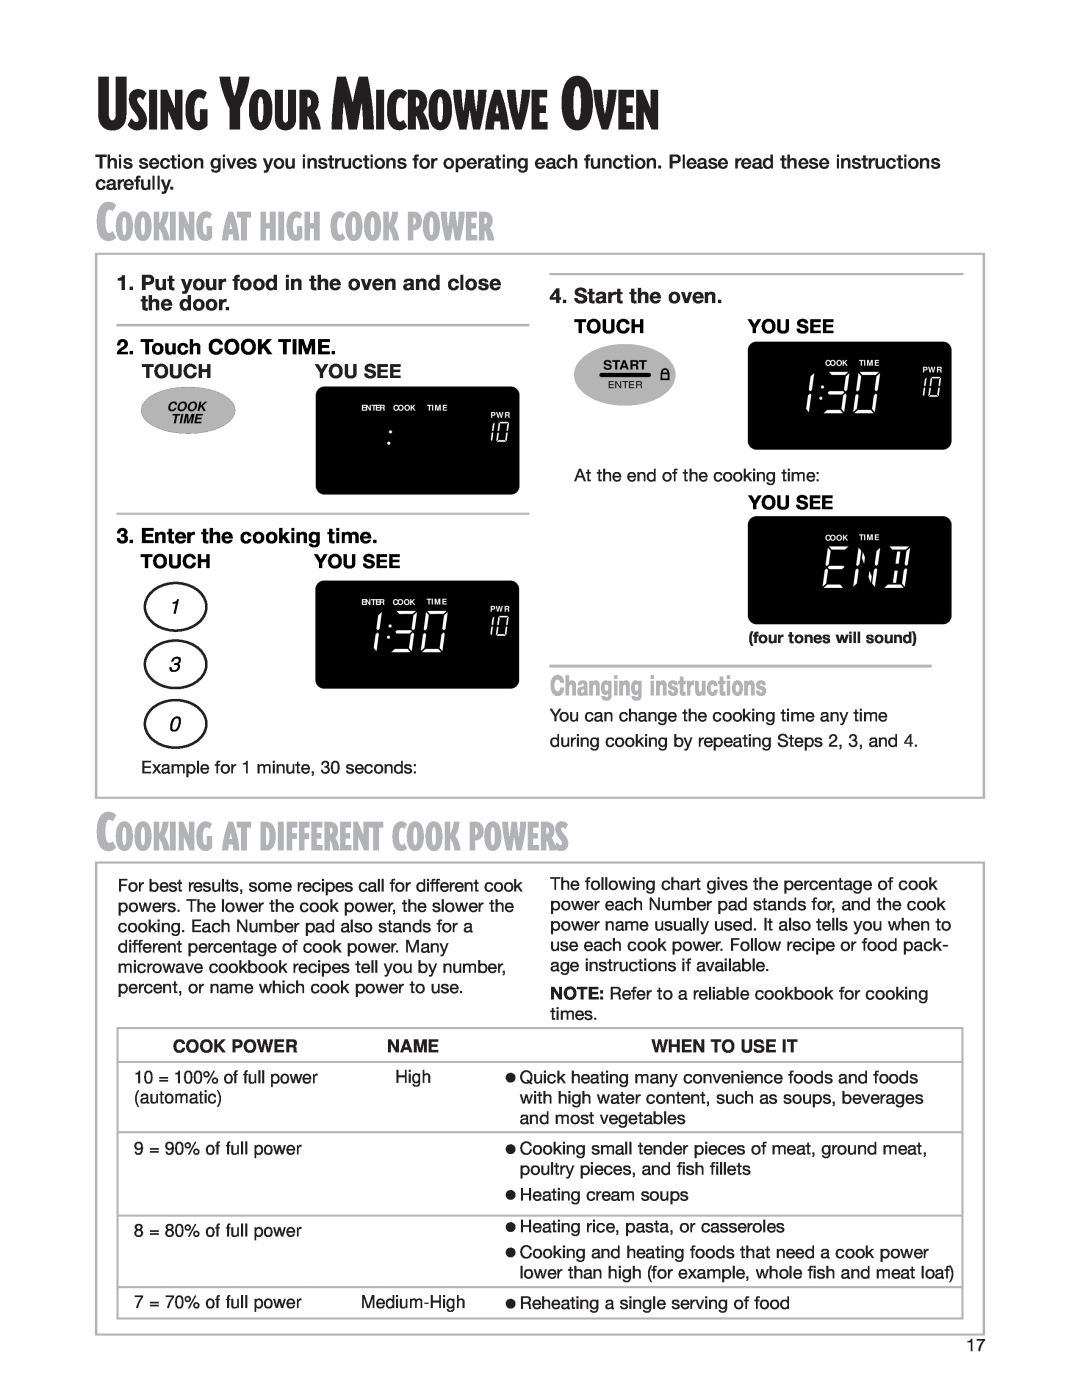 Whirlpool MH8150XJ Cooking At High Cook Power, Cooking At Different Cook Powers, Changing instructions, Start the oven 